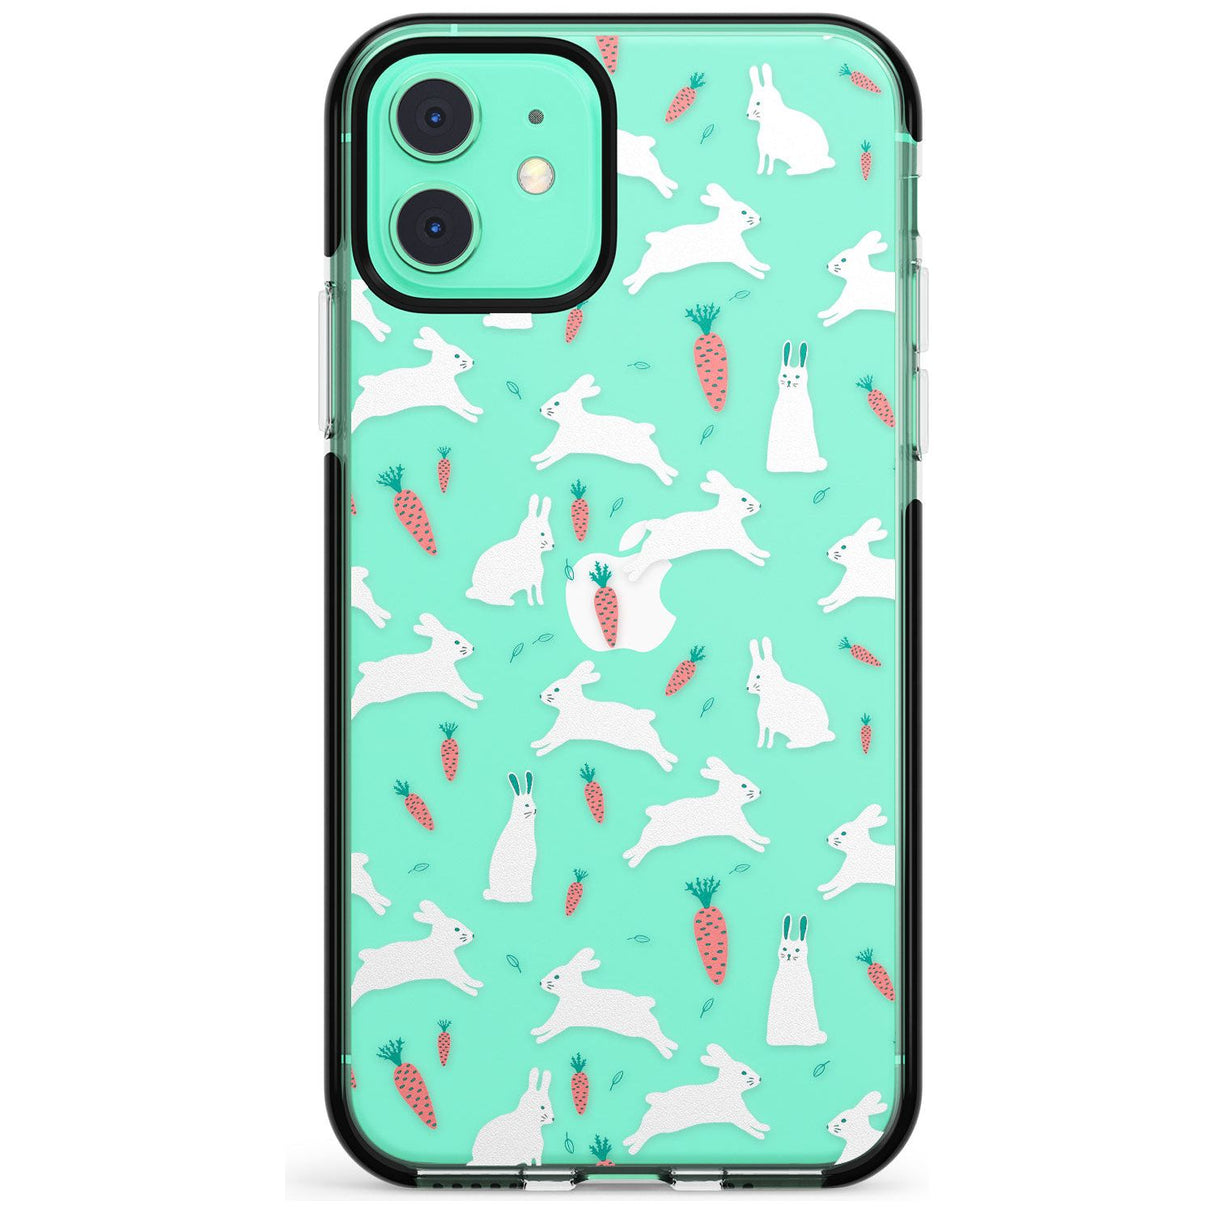 White Bunnies and Carrots Black Impact Phone Case for iPhone 11 Pro Max